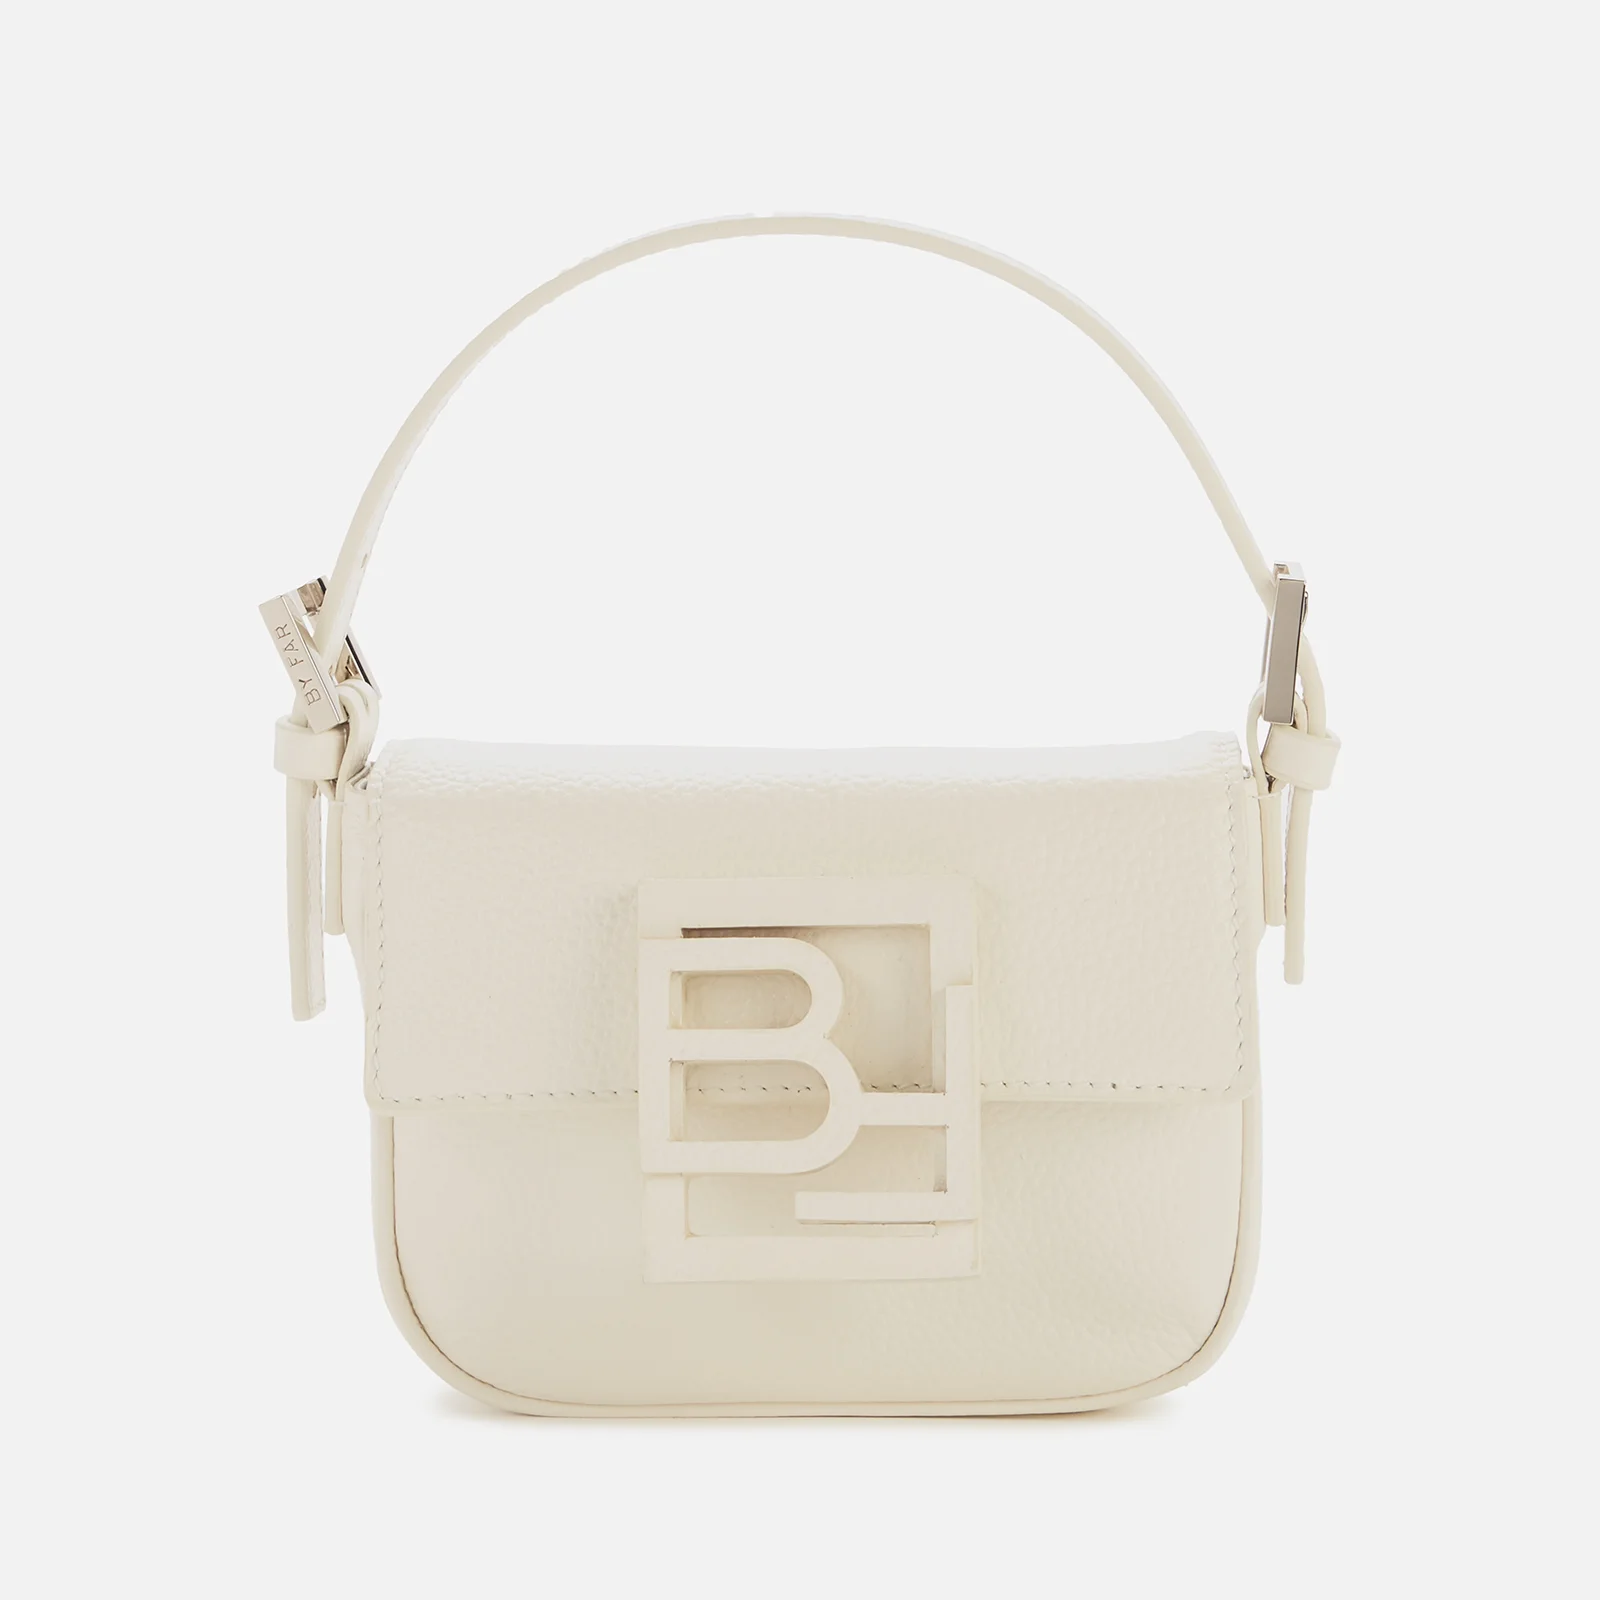 BY FAR Women's Alfie Gloss Grained Leather Bag - White Image 1